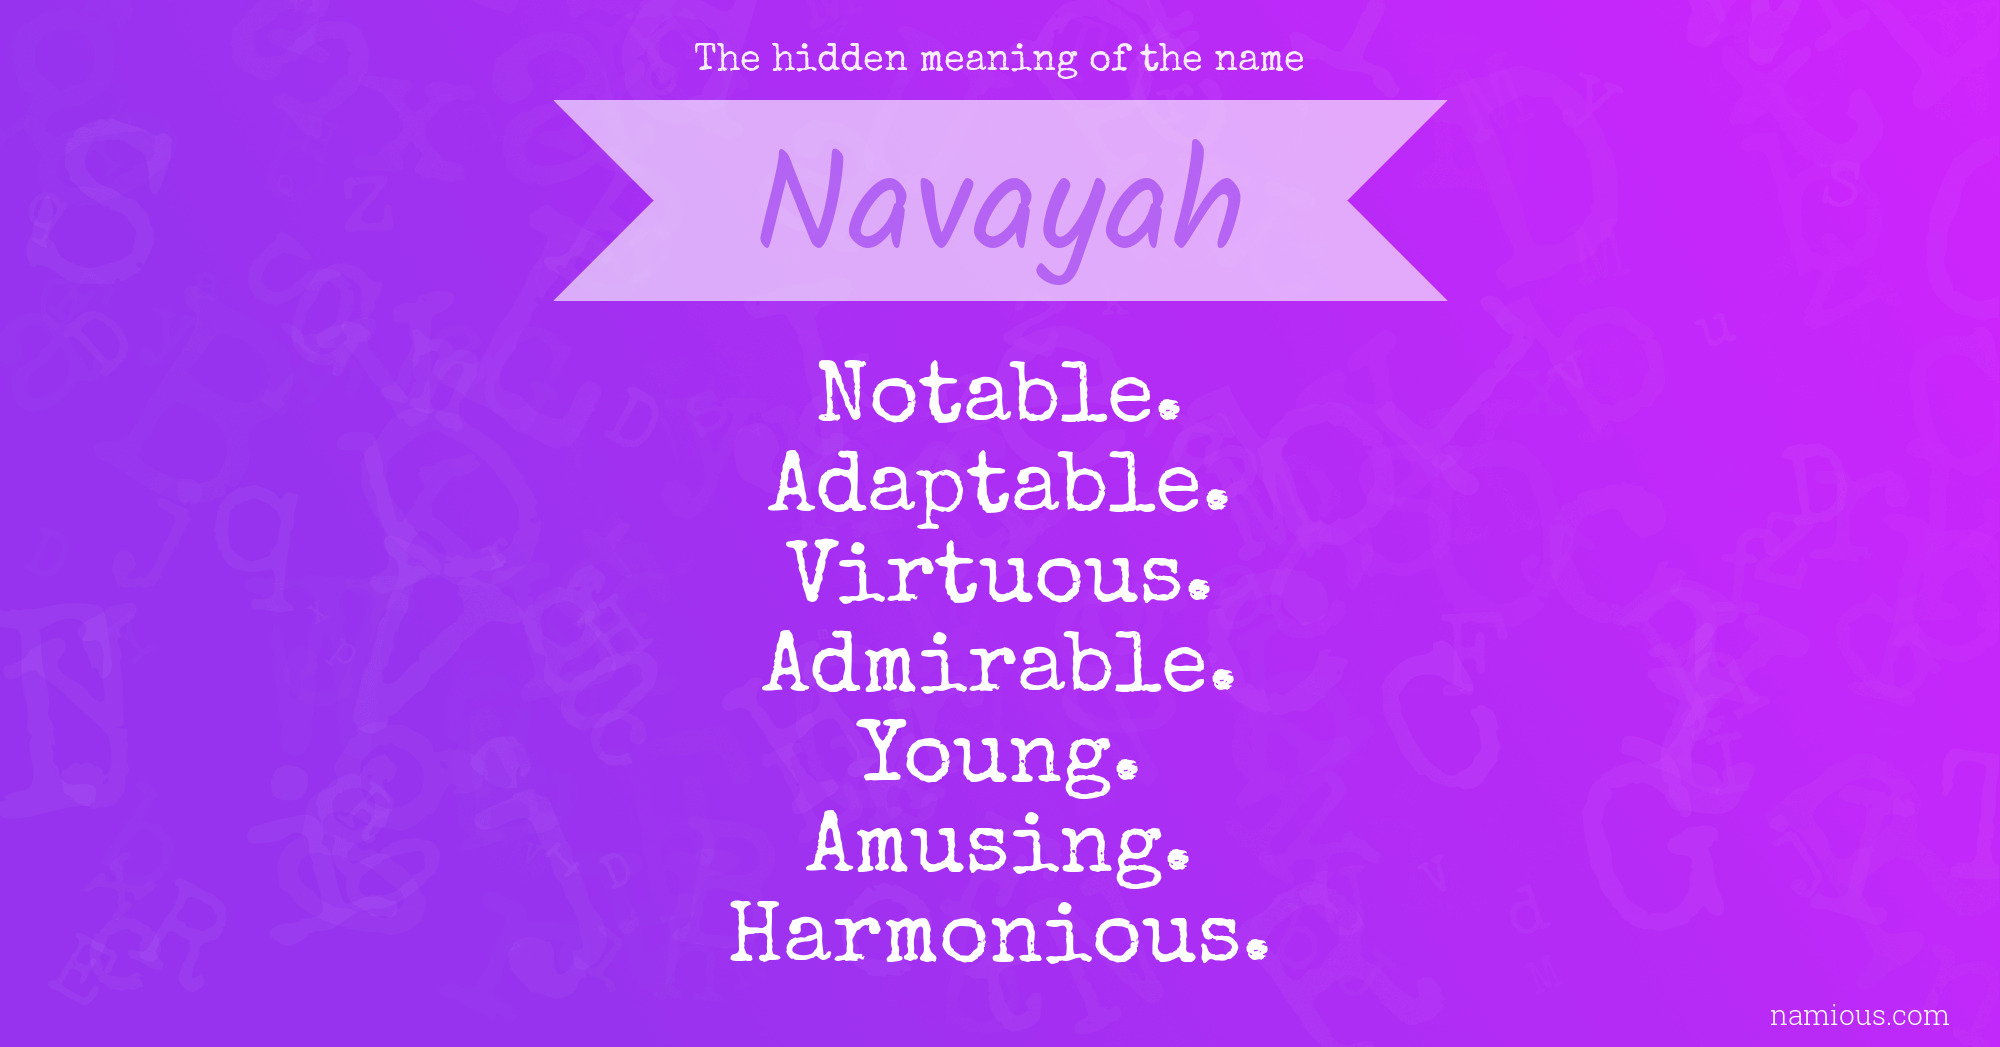 The hidden meaning of the name Navayah